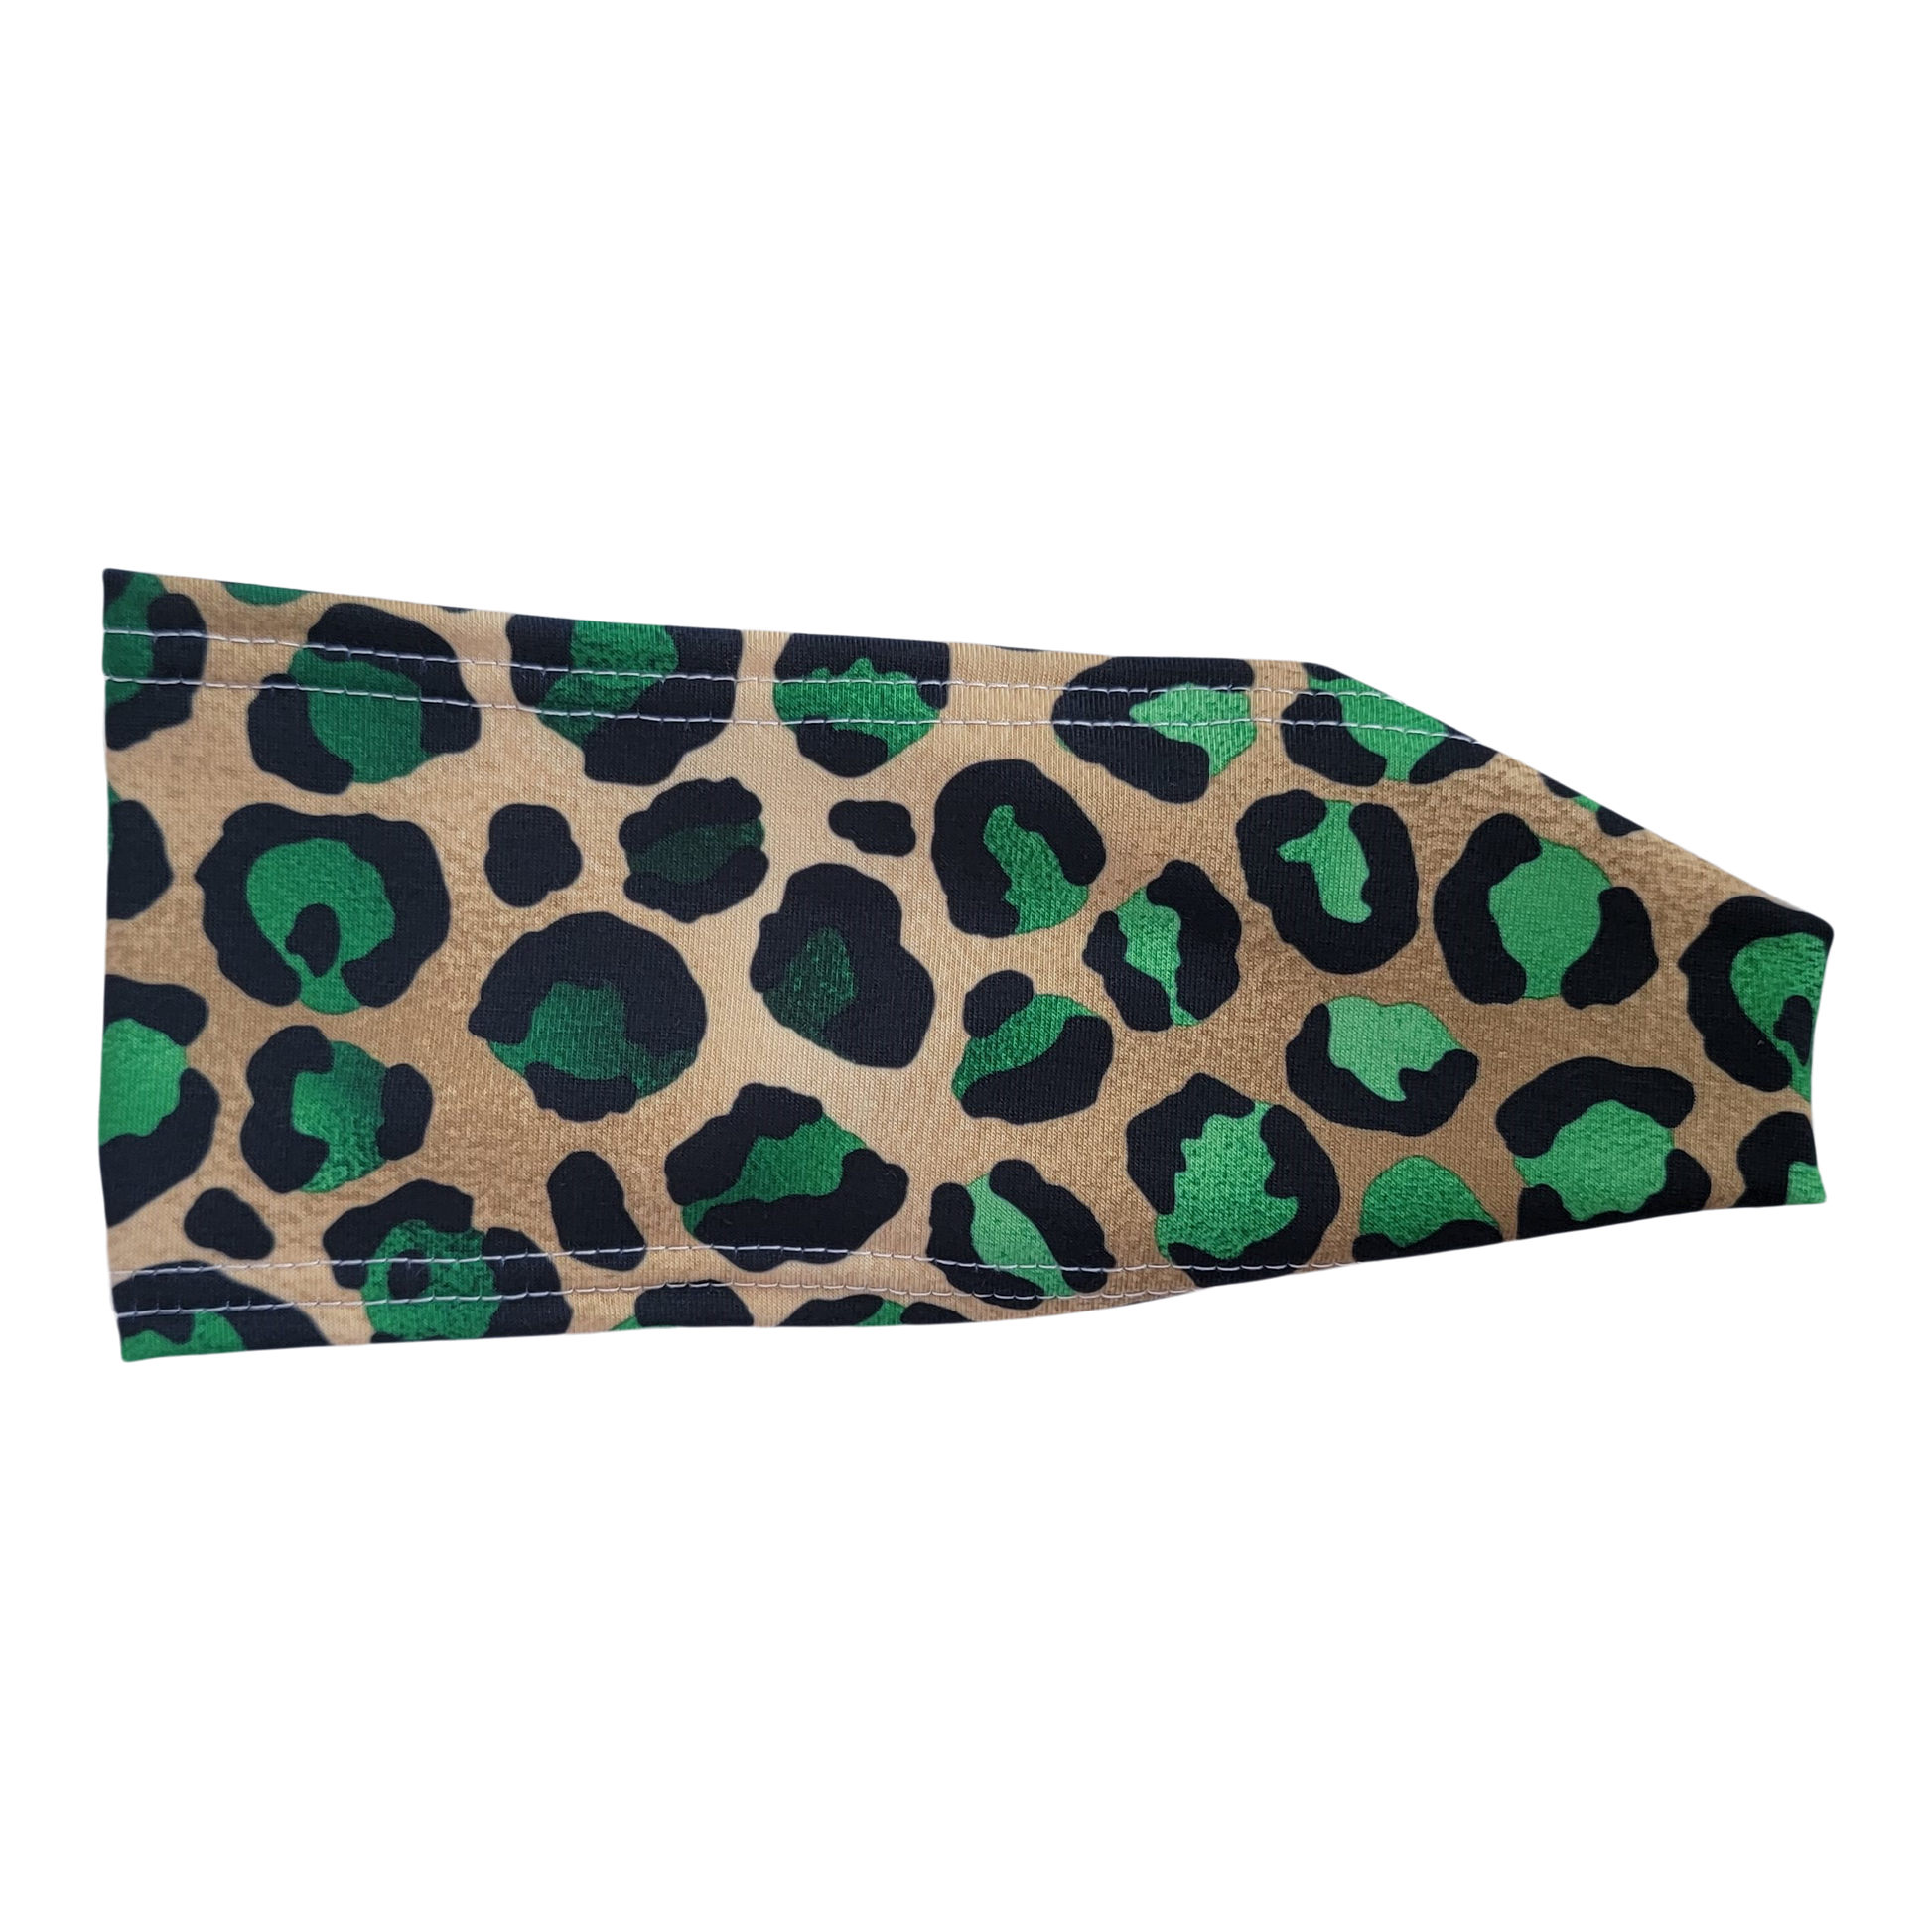 gold headband with black and green leopard spots